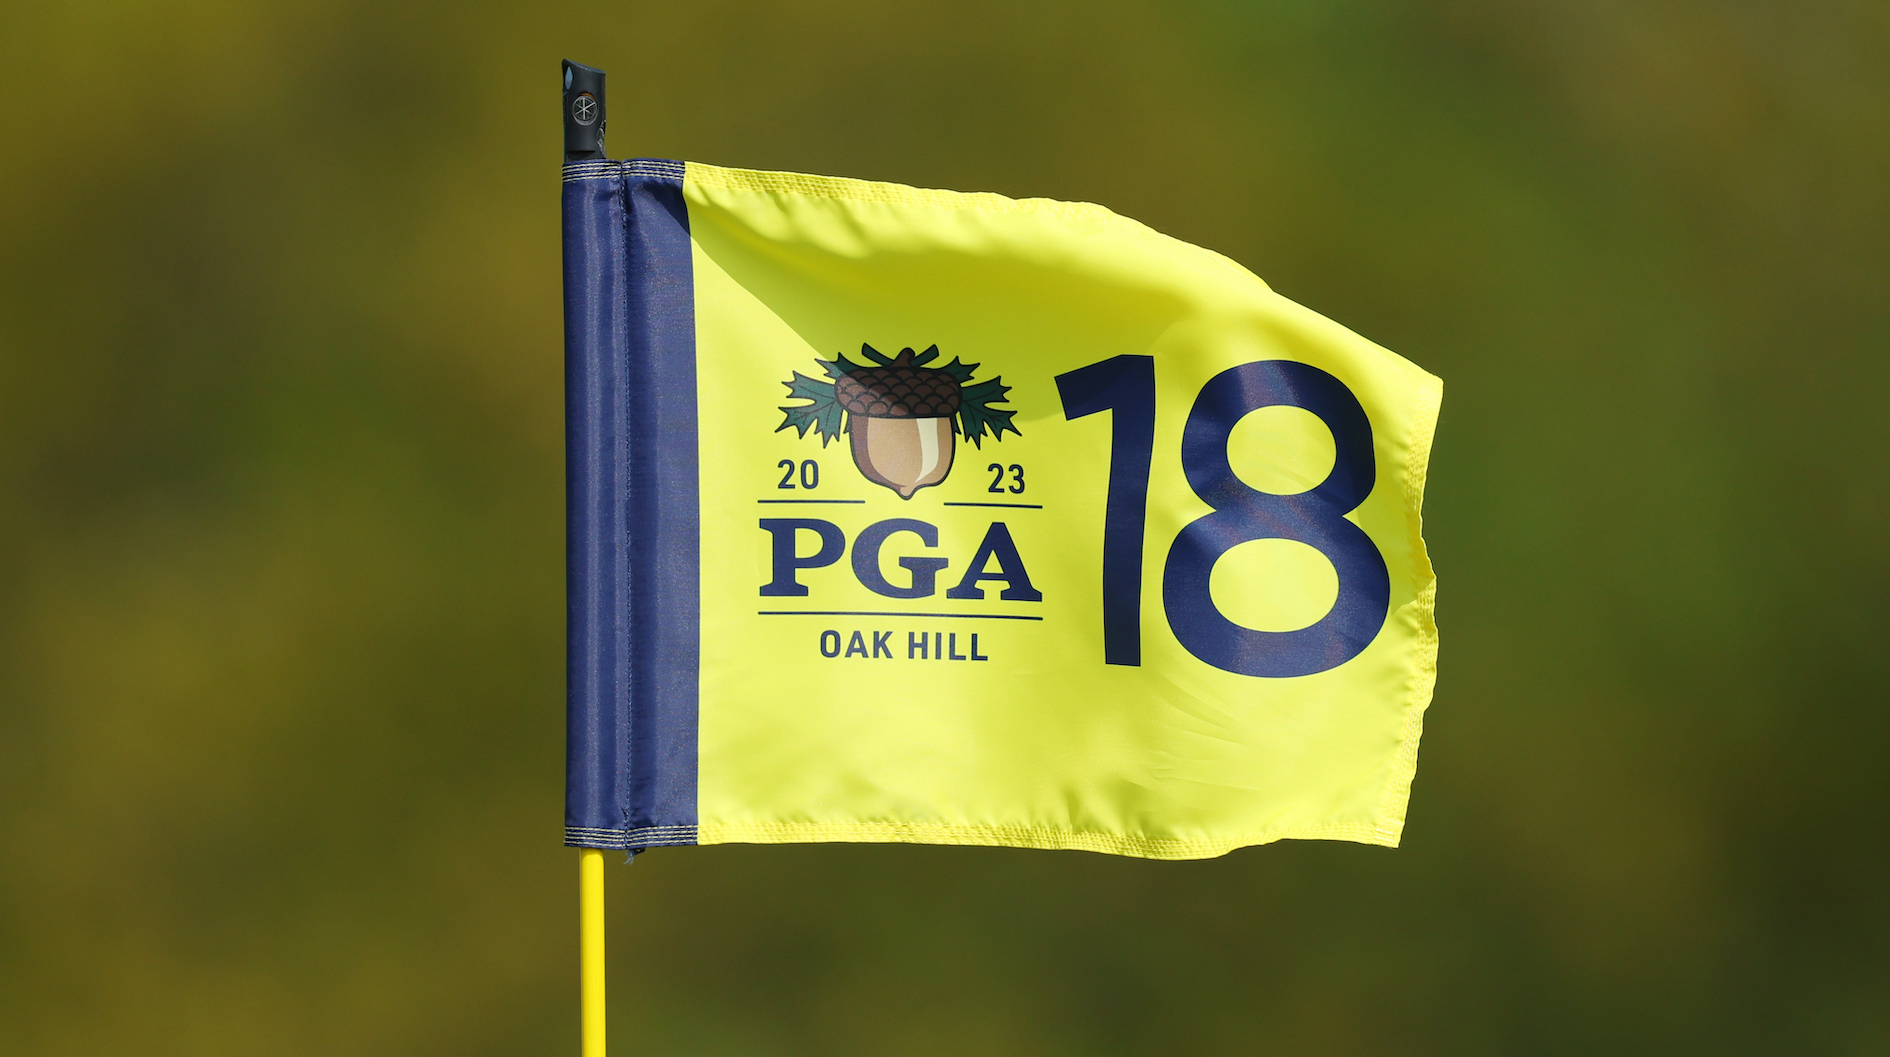 Prize money payout breakdown for 2023 PGA Championship at Oak Hill